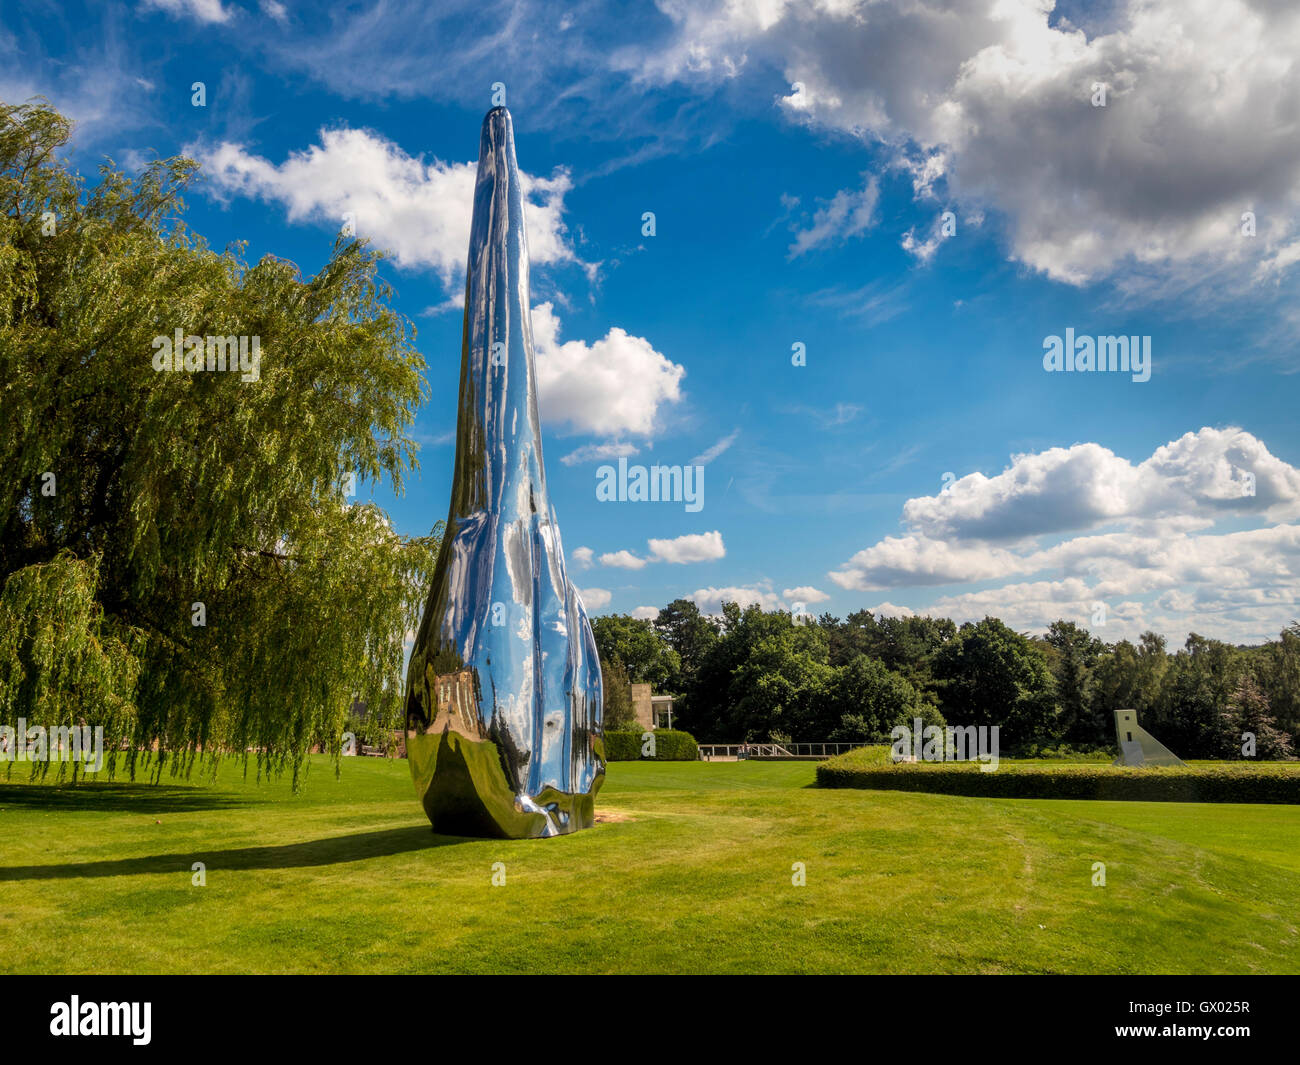 Tongue, 2010 by Swiss artist Not Vital, at Yorkshire Sculpture Park, near Wakefield, England, UK. Stock Photo